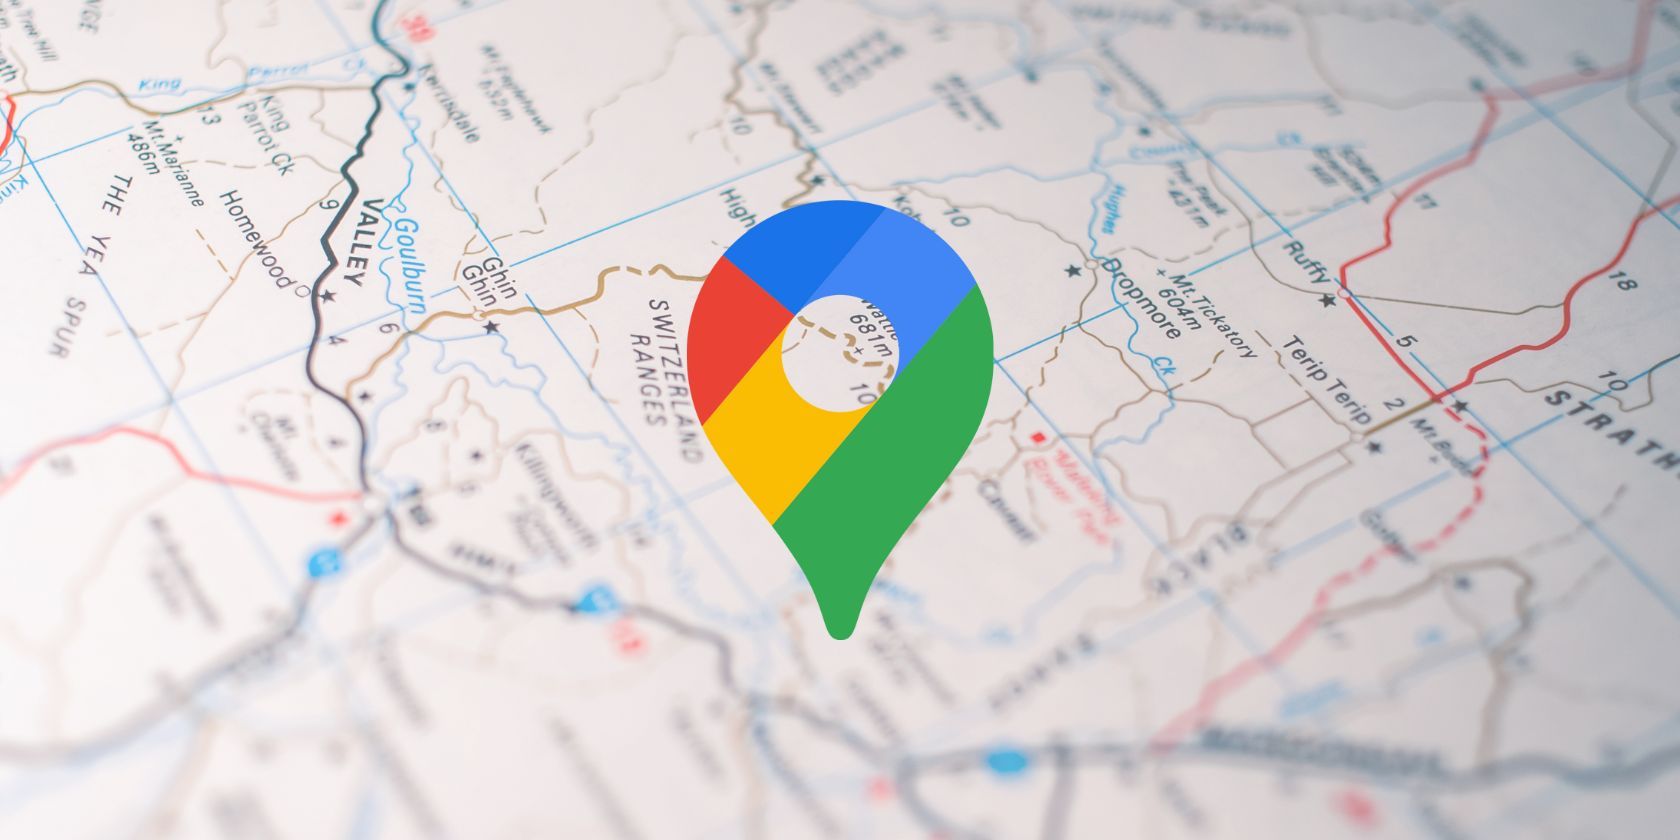 How to Save a Route on Google Maps on Any Platform